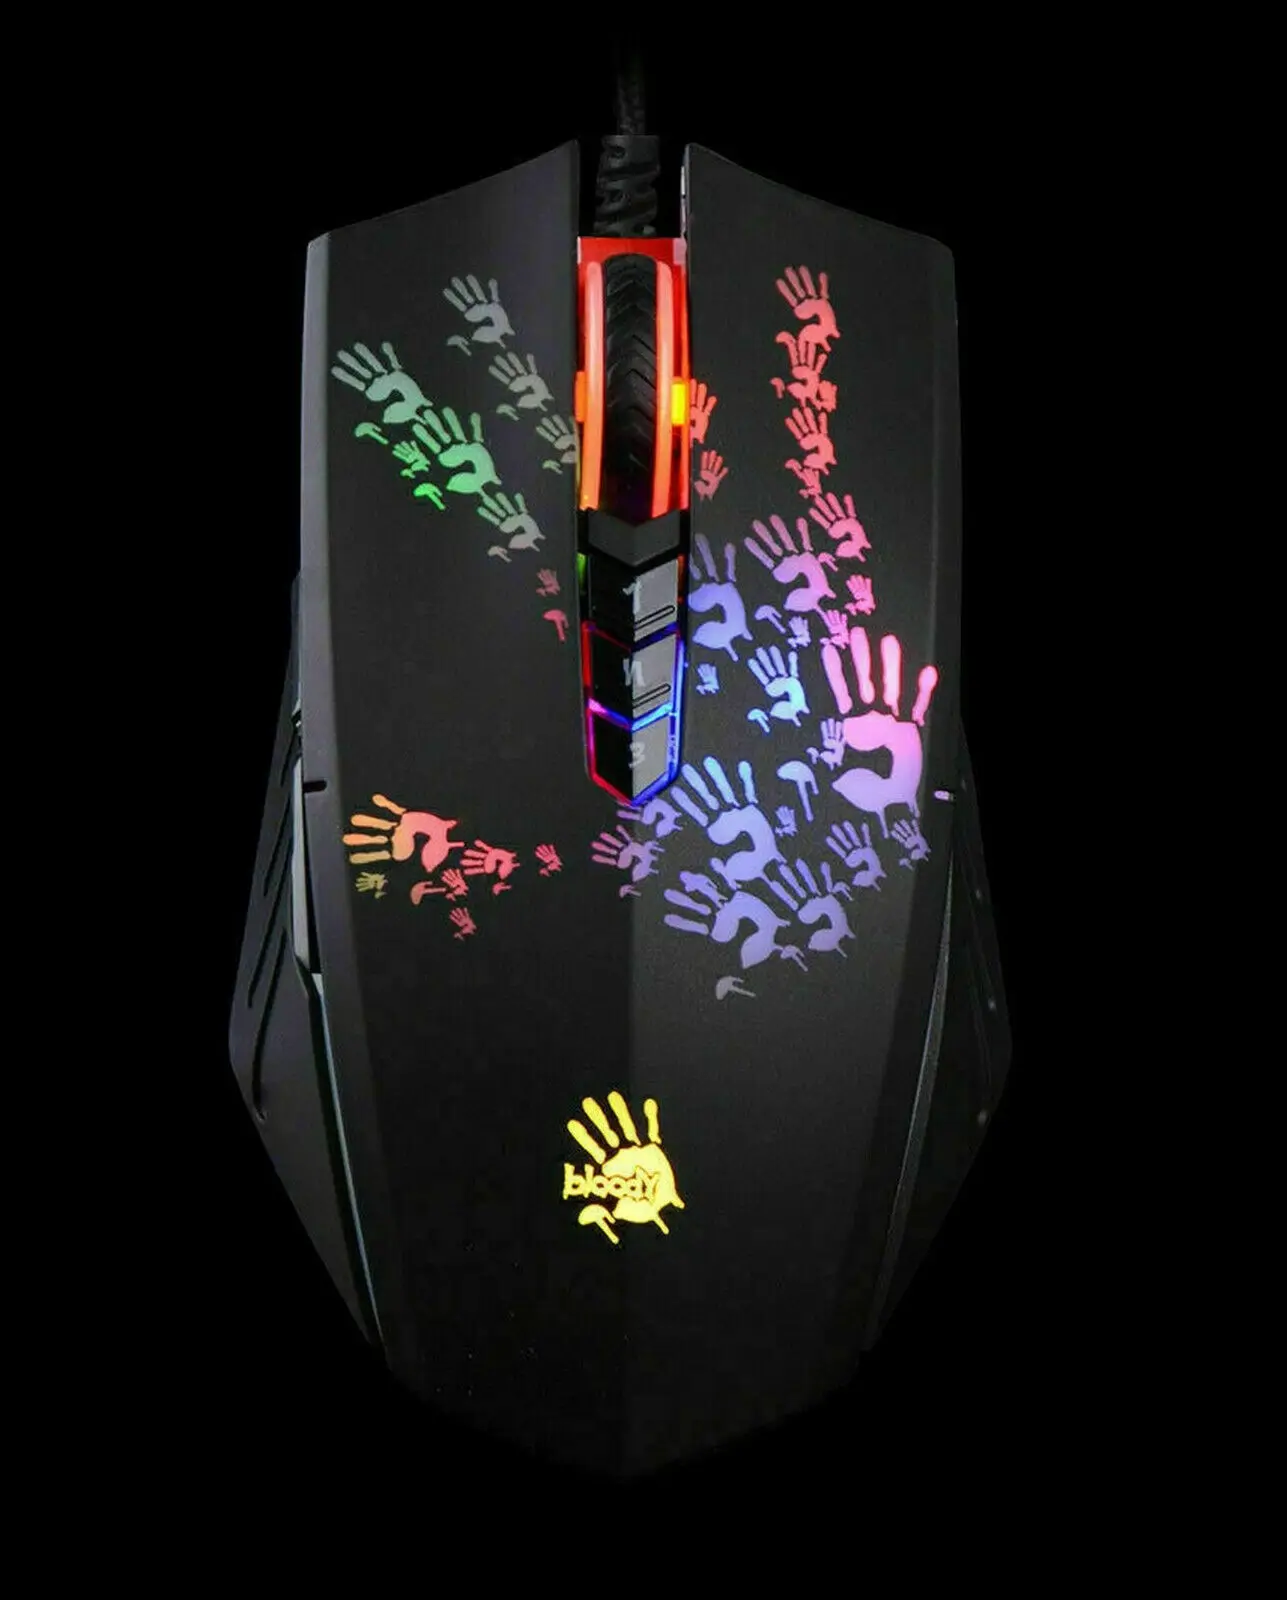 

NEW 2022 A4TECH Bloody A60 GAMING MOUSE,OPTICAL A3050, 4000DPI, WIRED, New Sealed Box